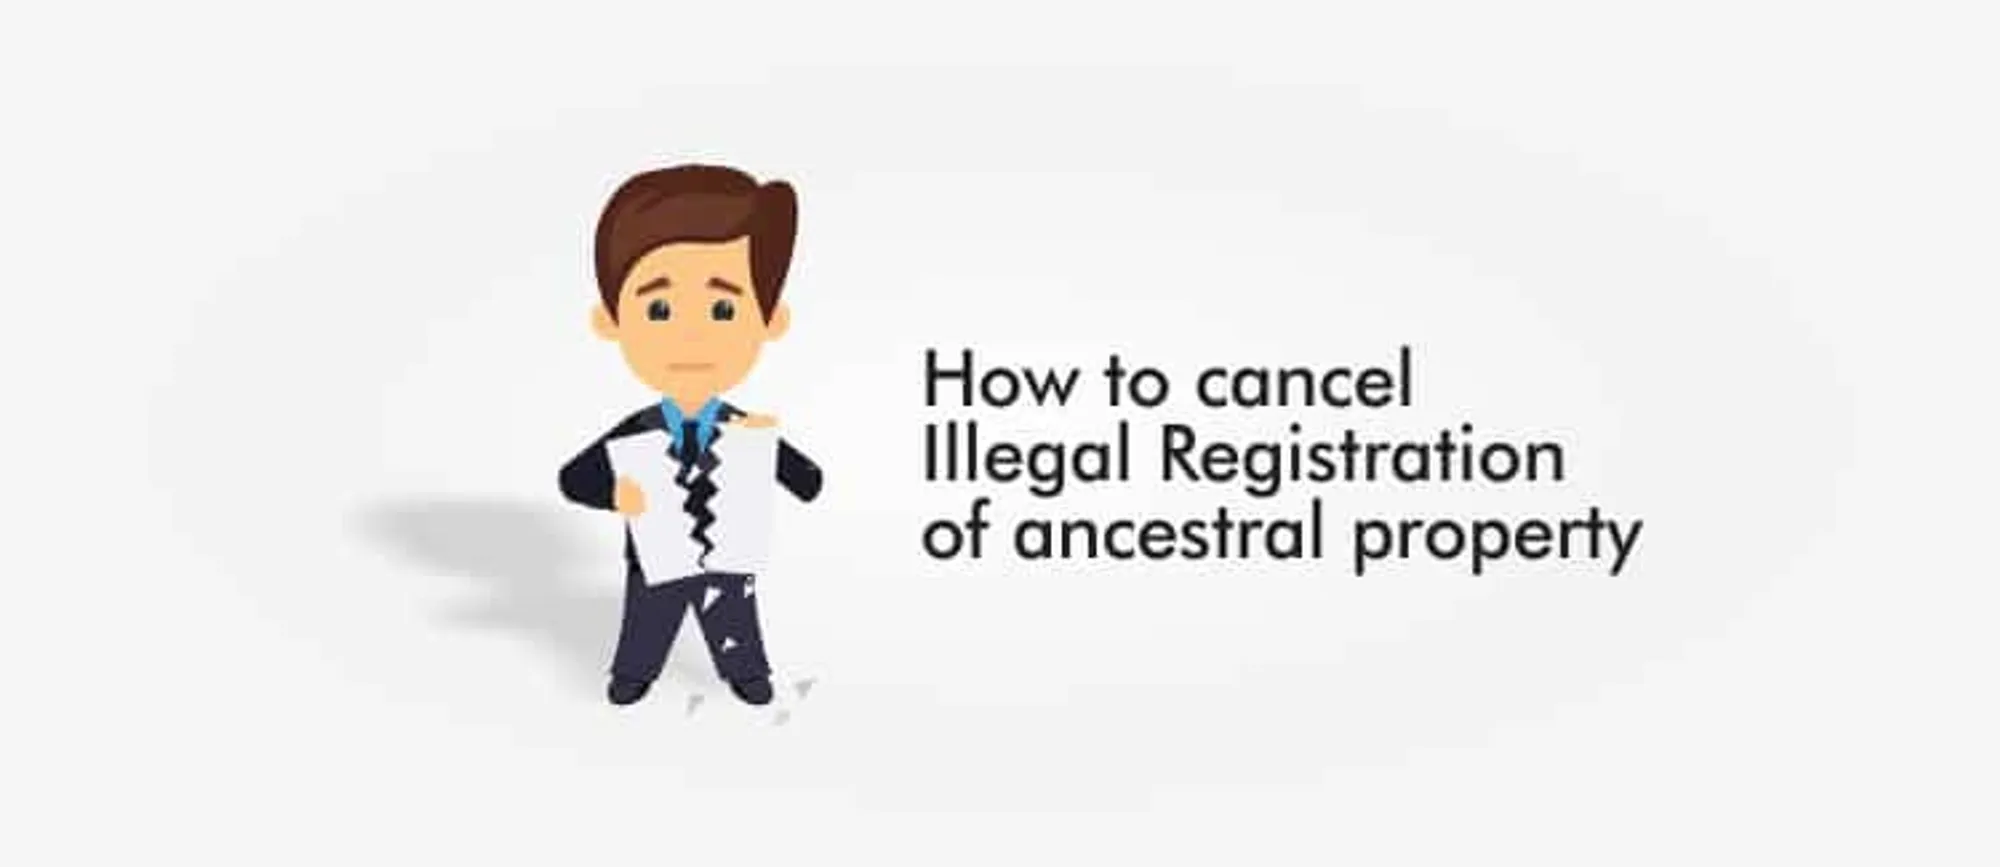 How to cancel Illegal Registration of ancestral property